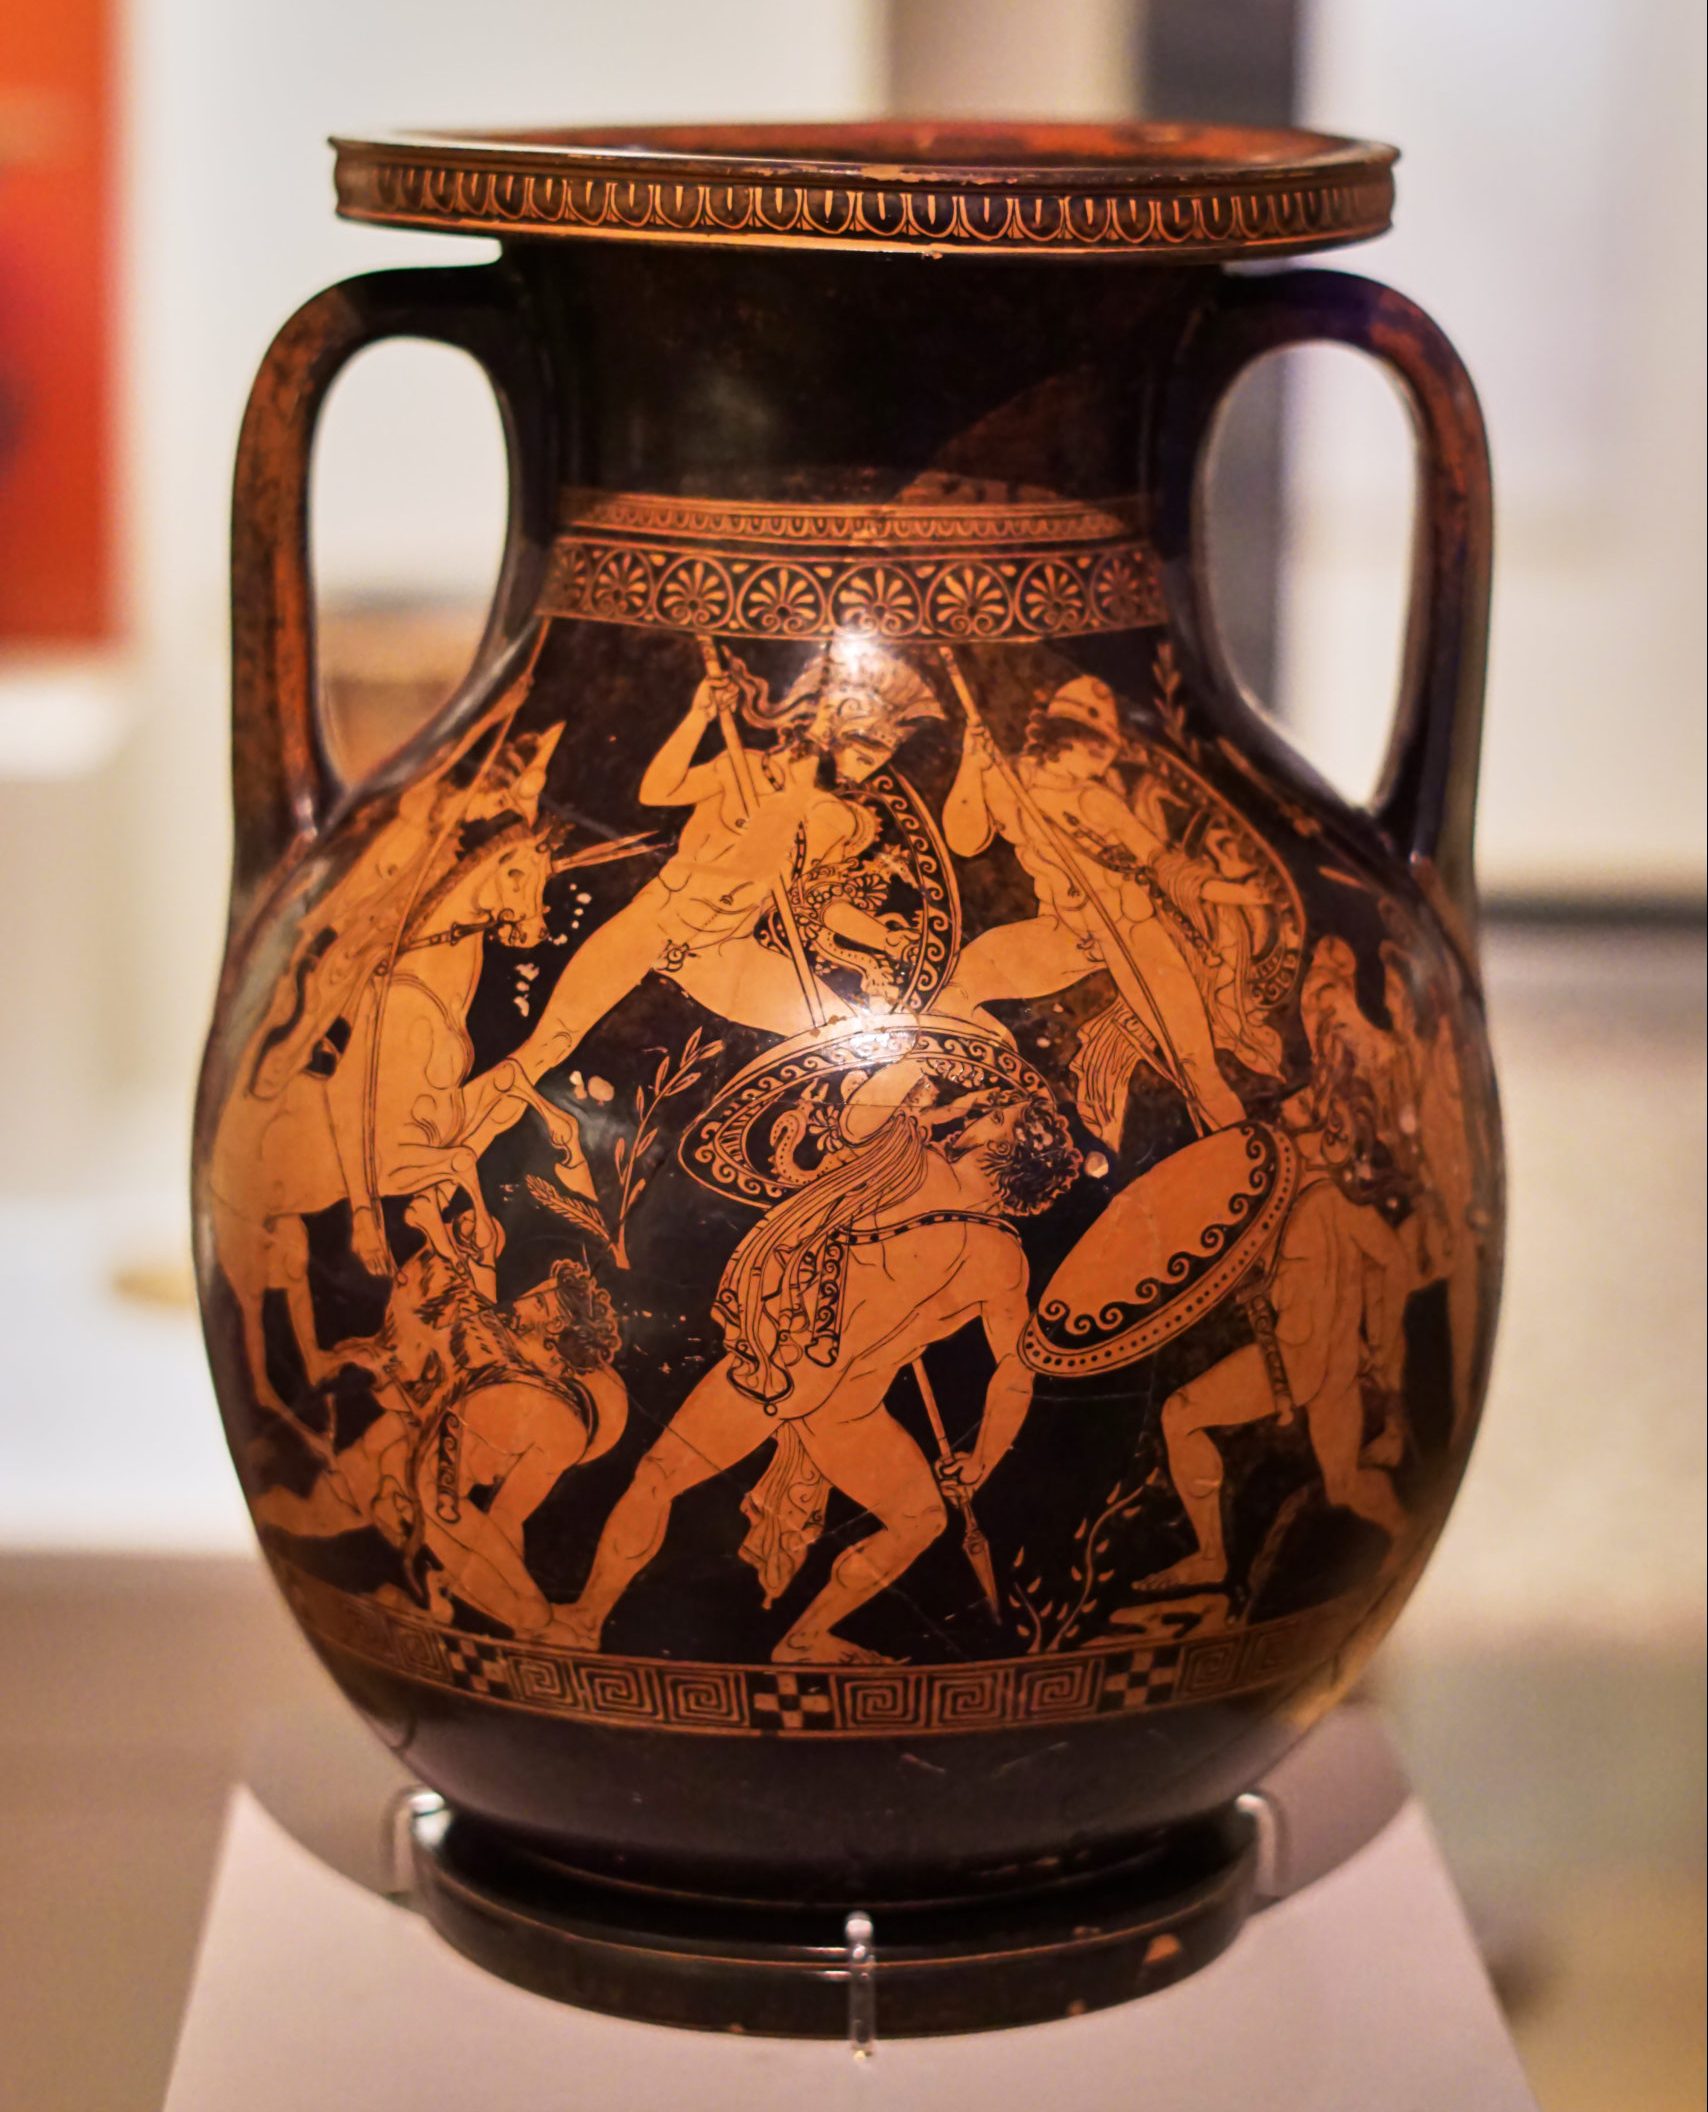 Ares and two other gods (the Dioscuri) leap down from above and attack a group of giants. Ares, in a plumed helm and carrying a shield, stabs a spear into the giant below.